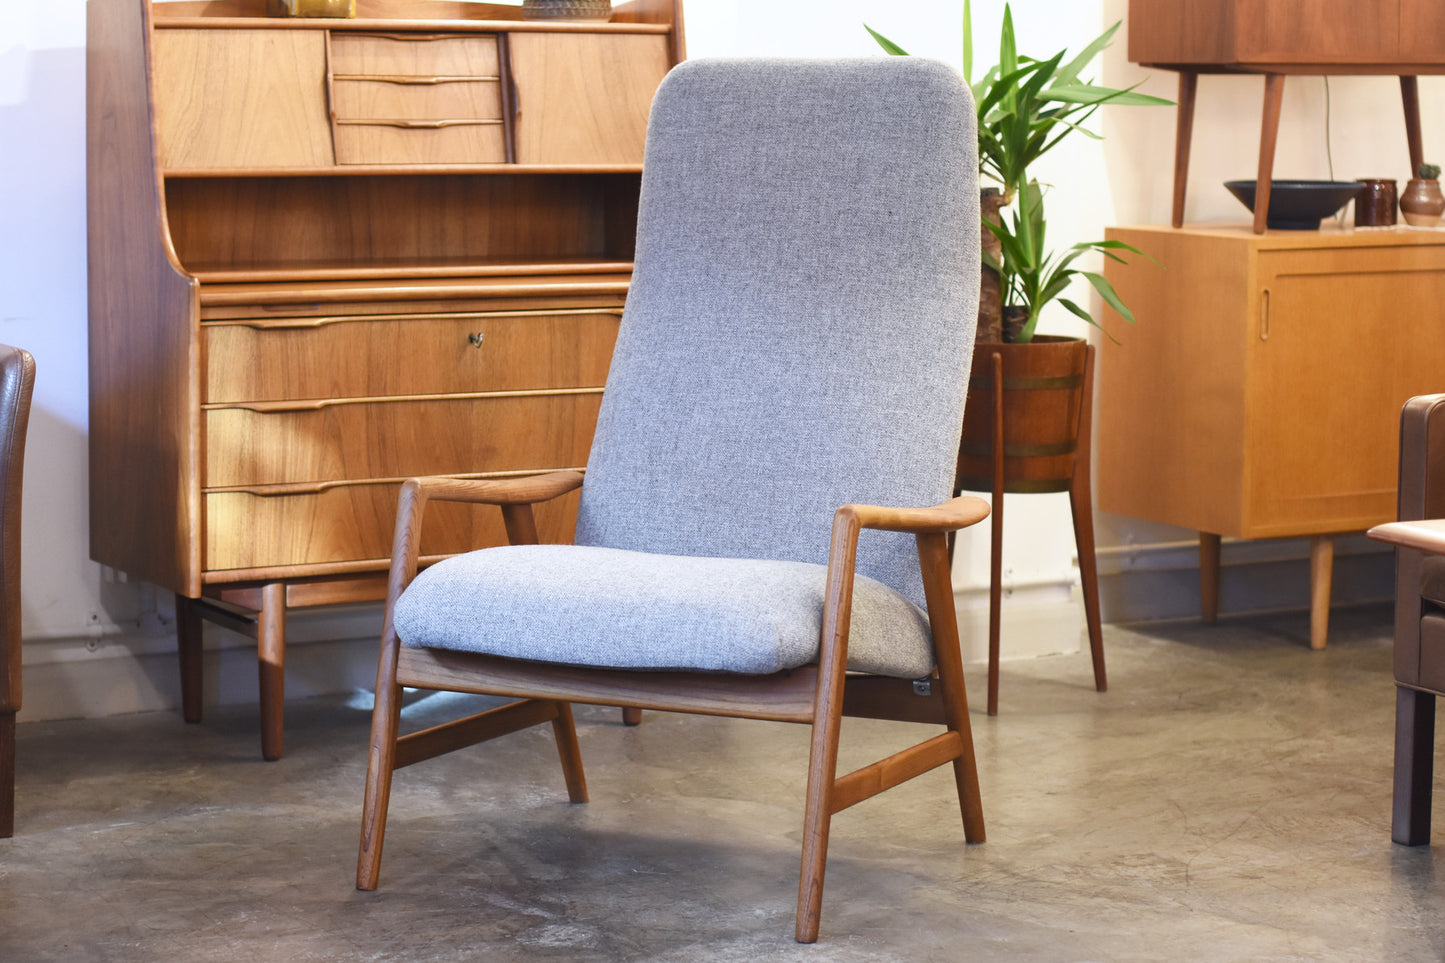 Just in: Reclining lounge chair by Alf Svensson